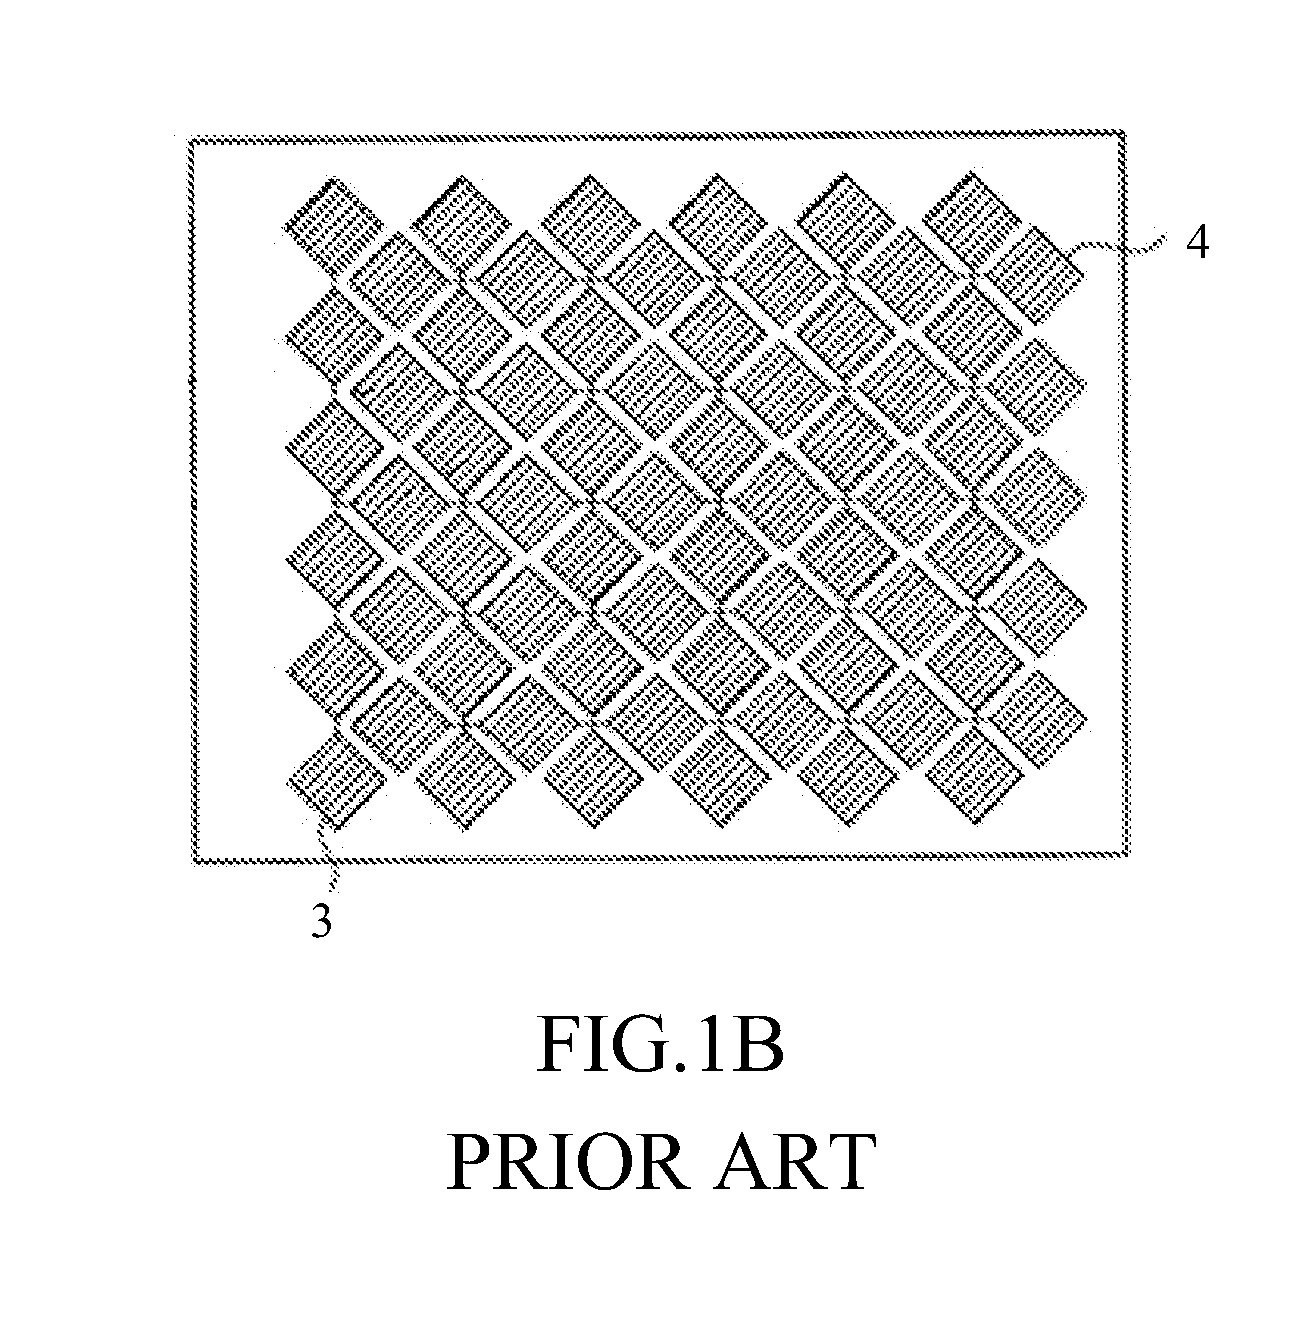 Method of reducing computation of water tolerance by projecting touch data